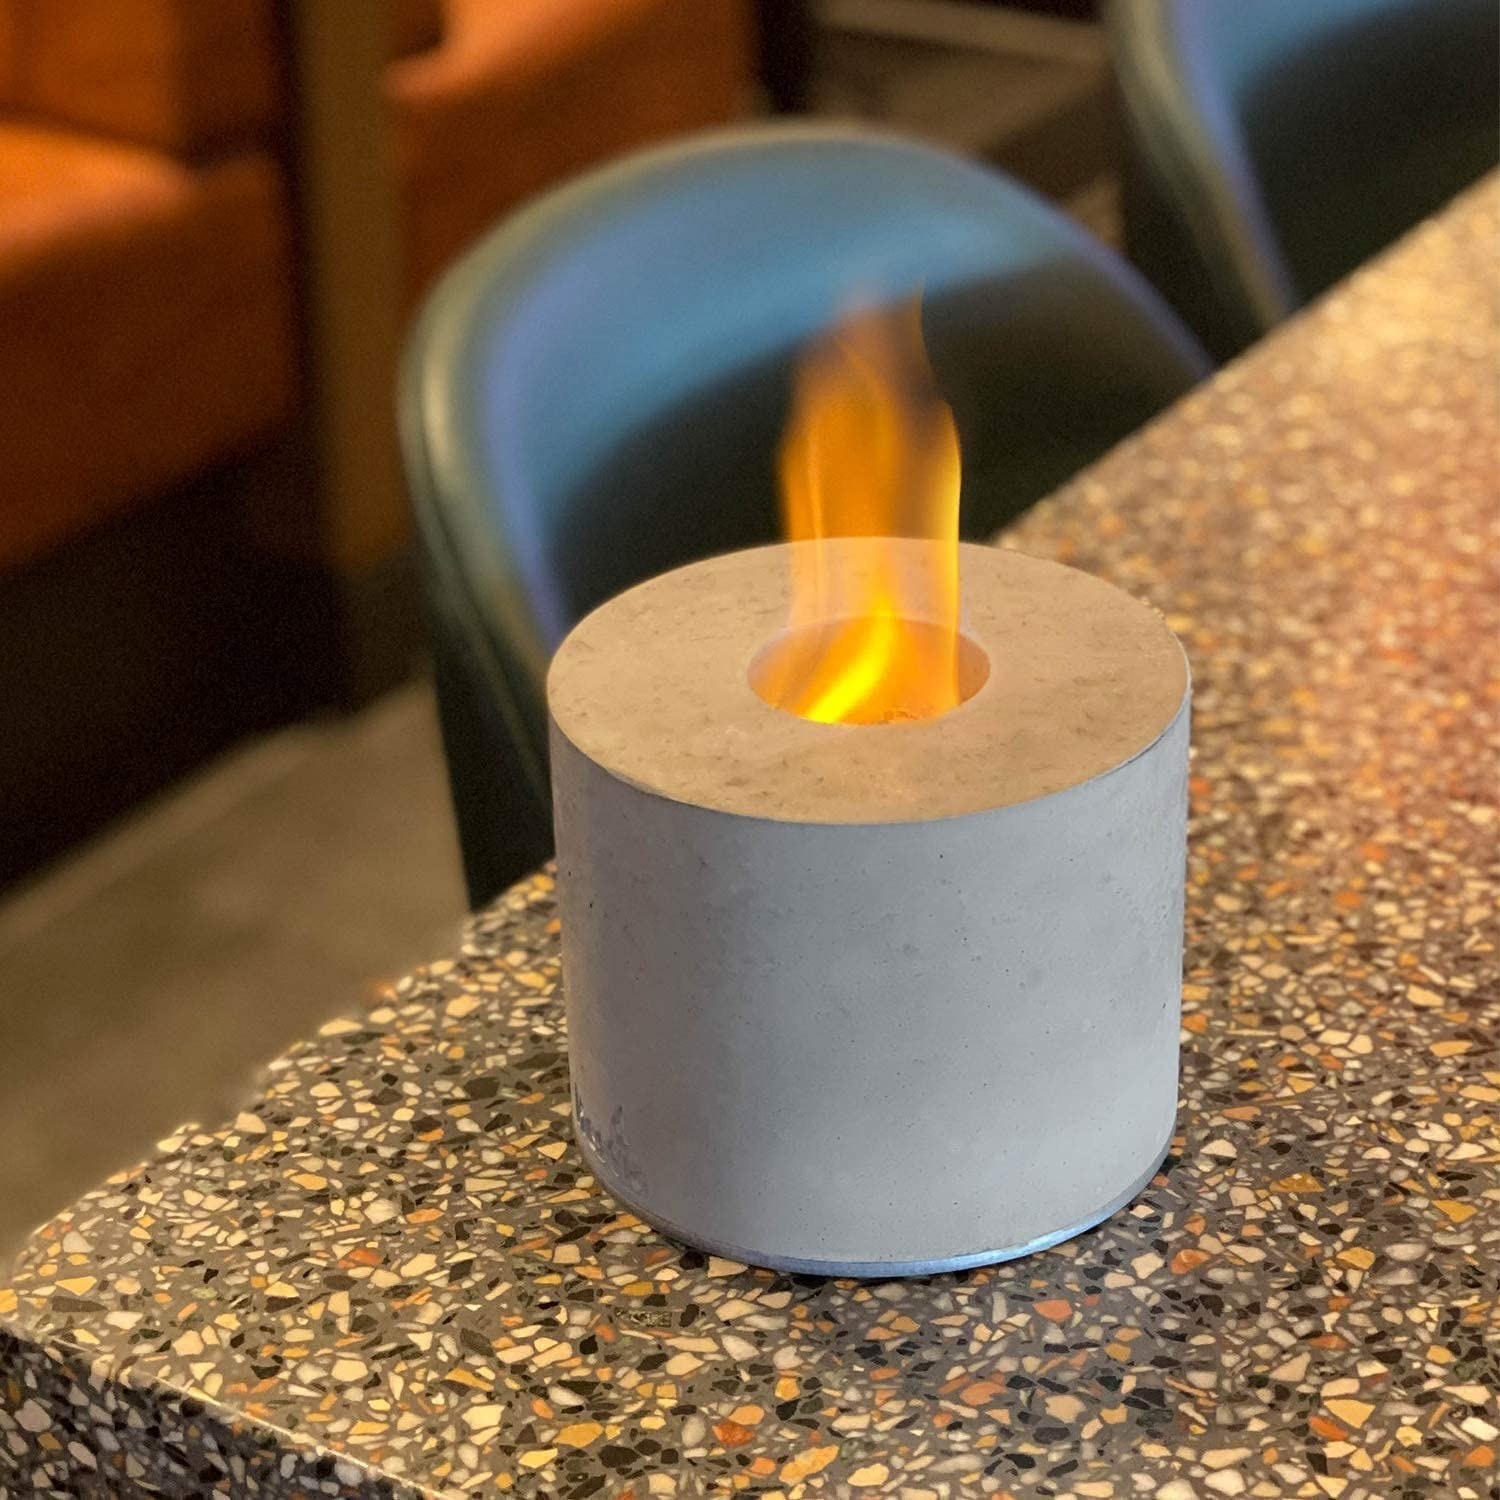 The mini fire pit on a countertop